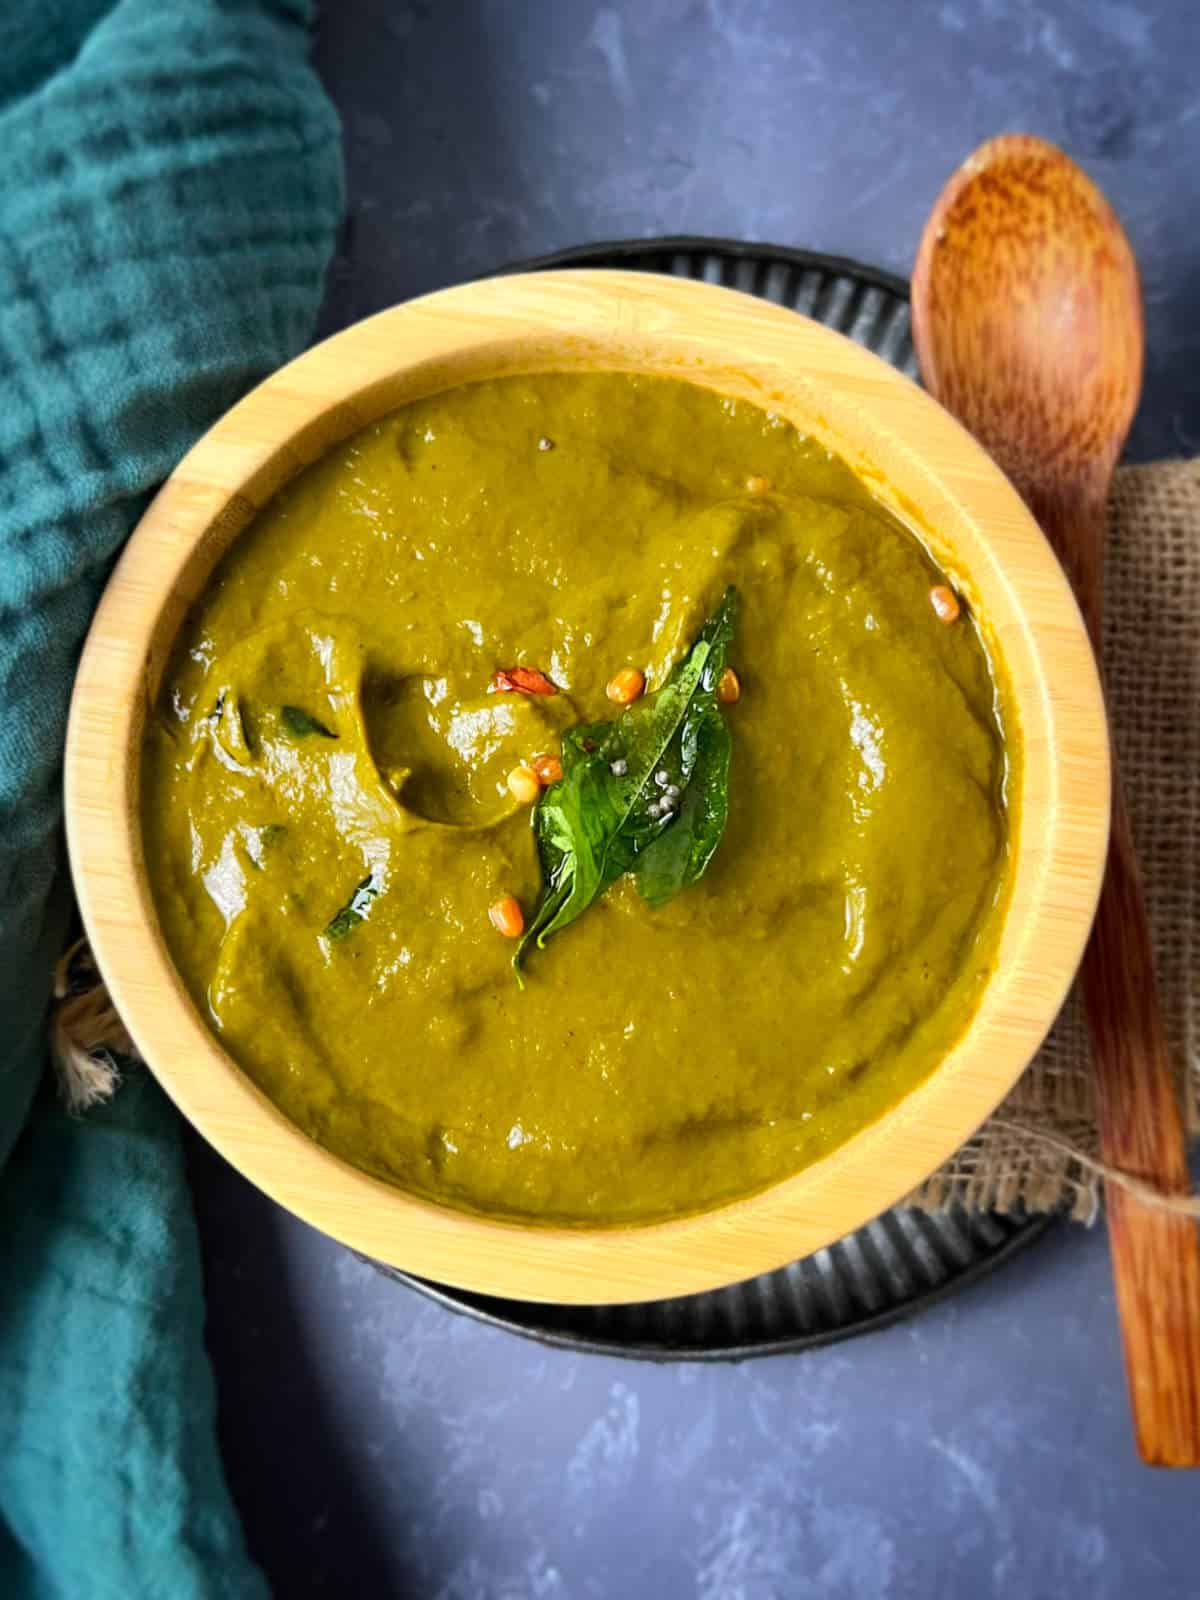 Malabar spinach chutney served in a wooden bowl with a wooden spoon.